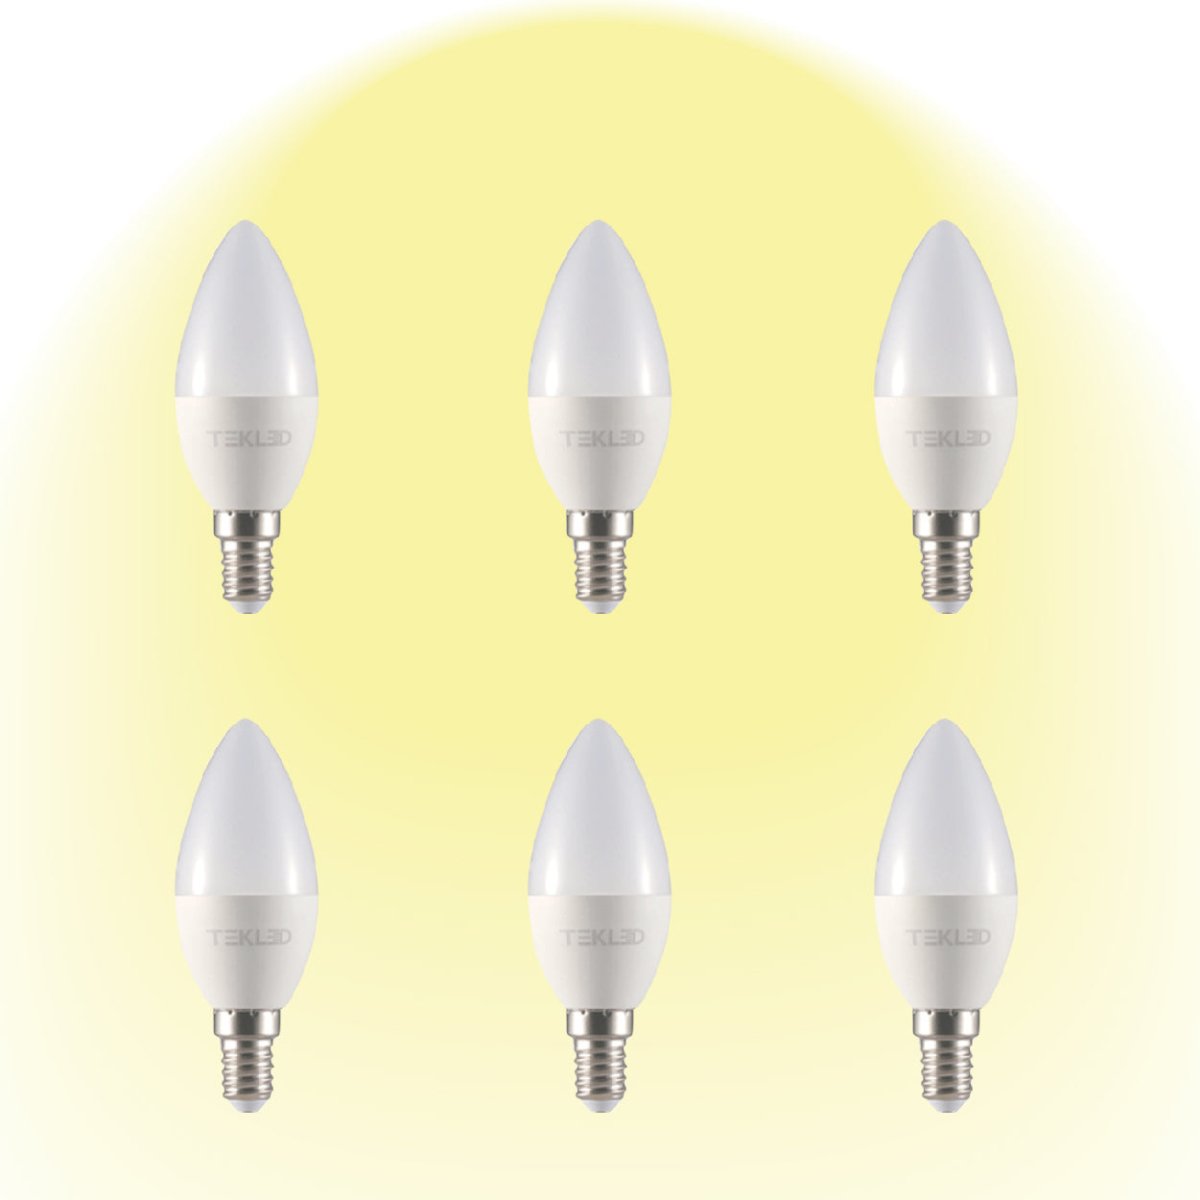 Vela LED Candle Bulb C37 Dimmable E14 Small Edison Screw 5W Pack of 6 3000K warm white